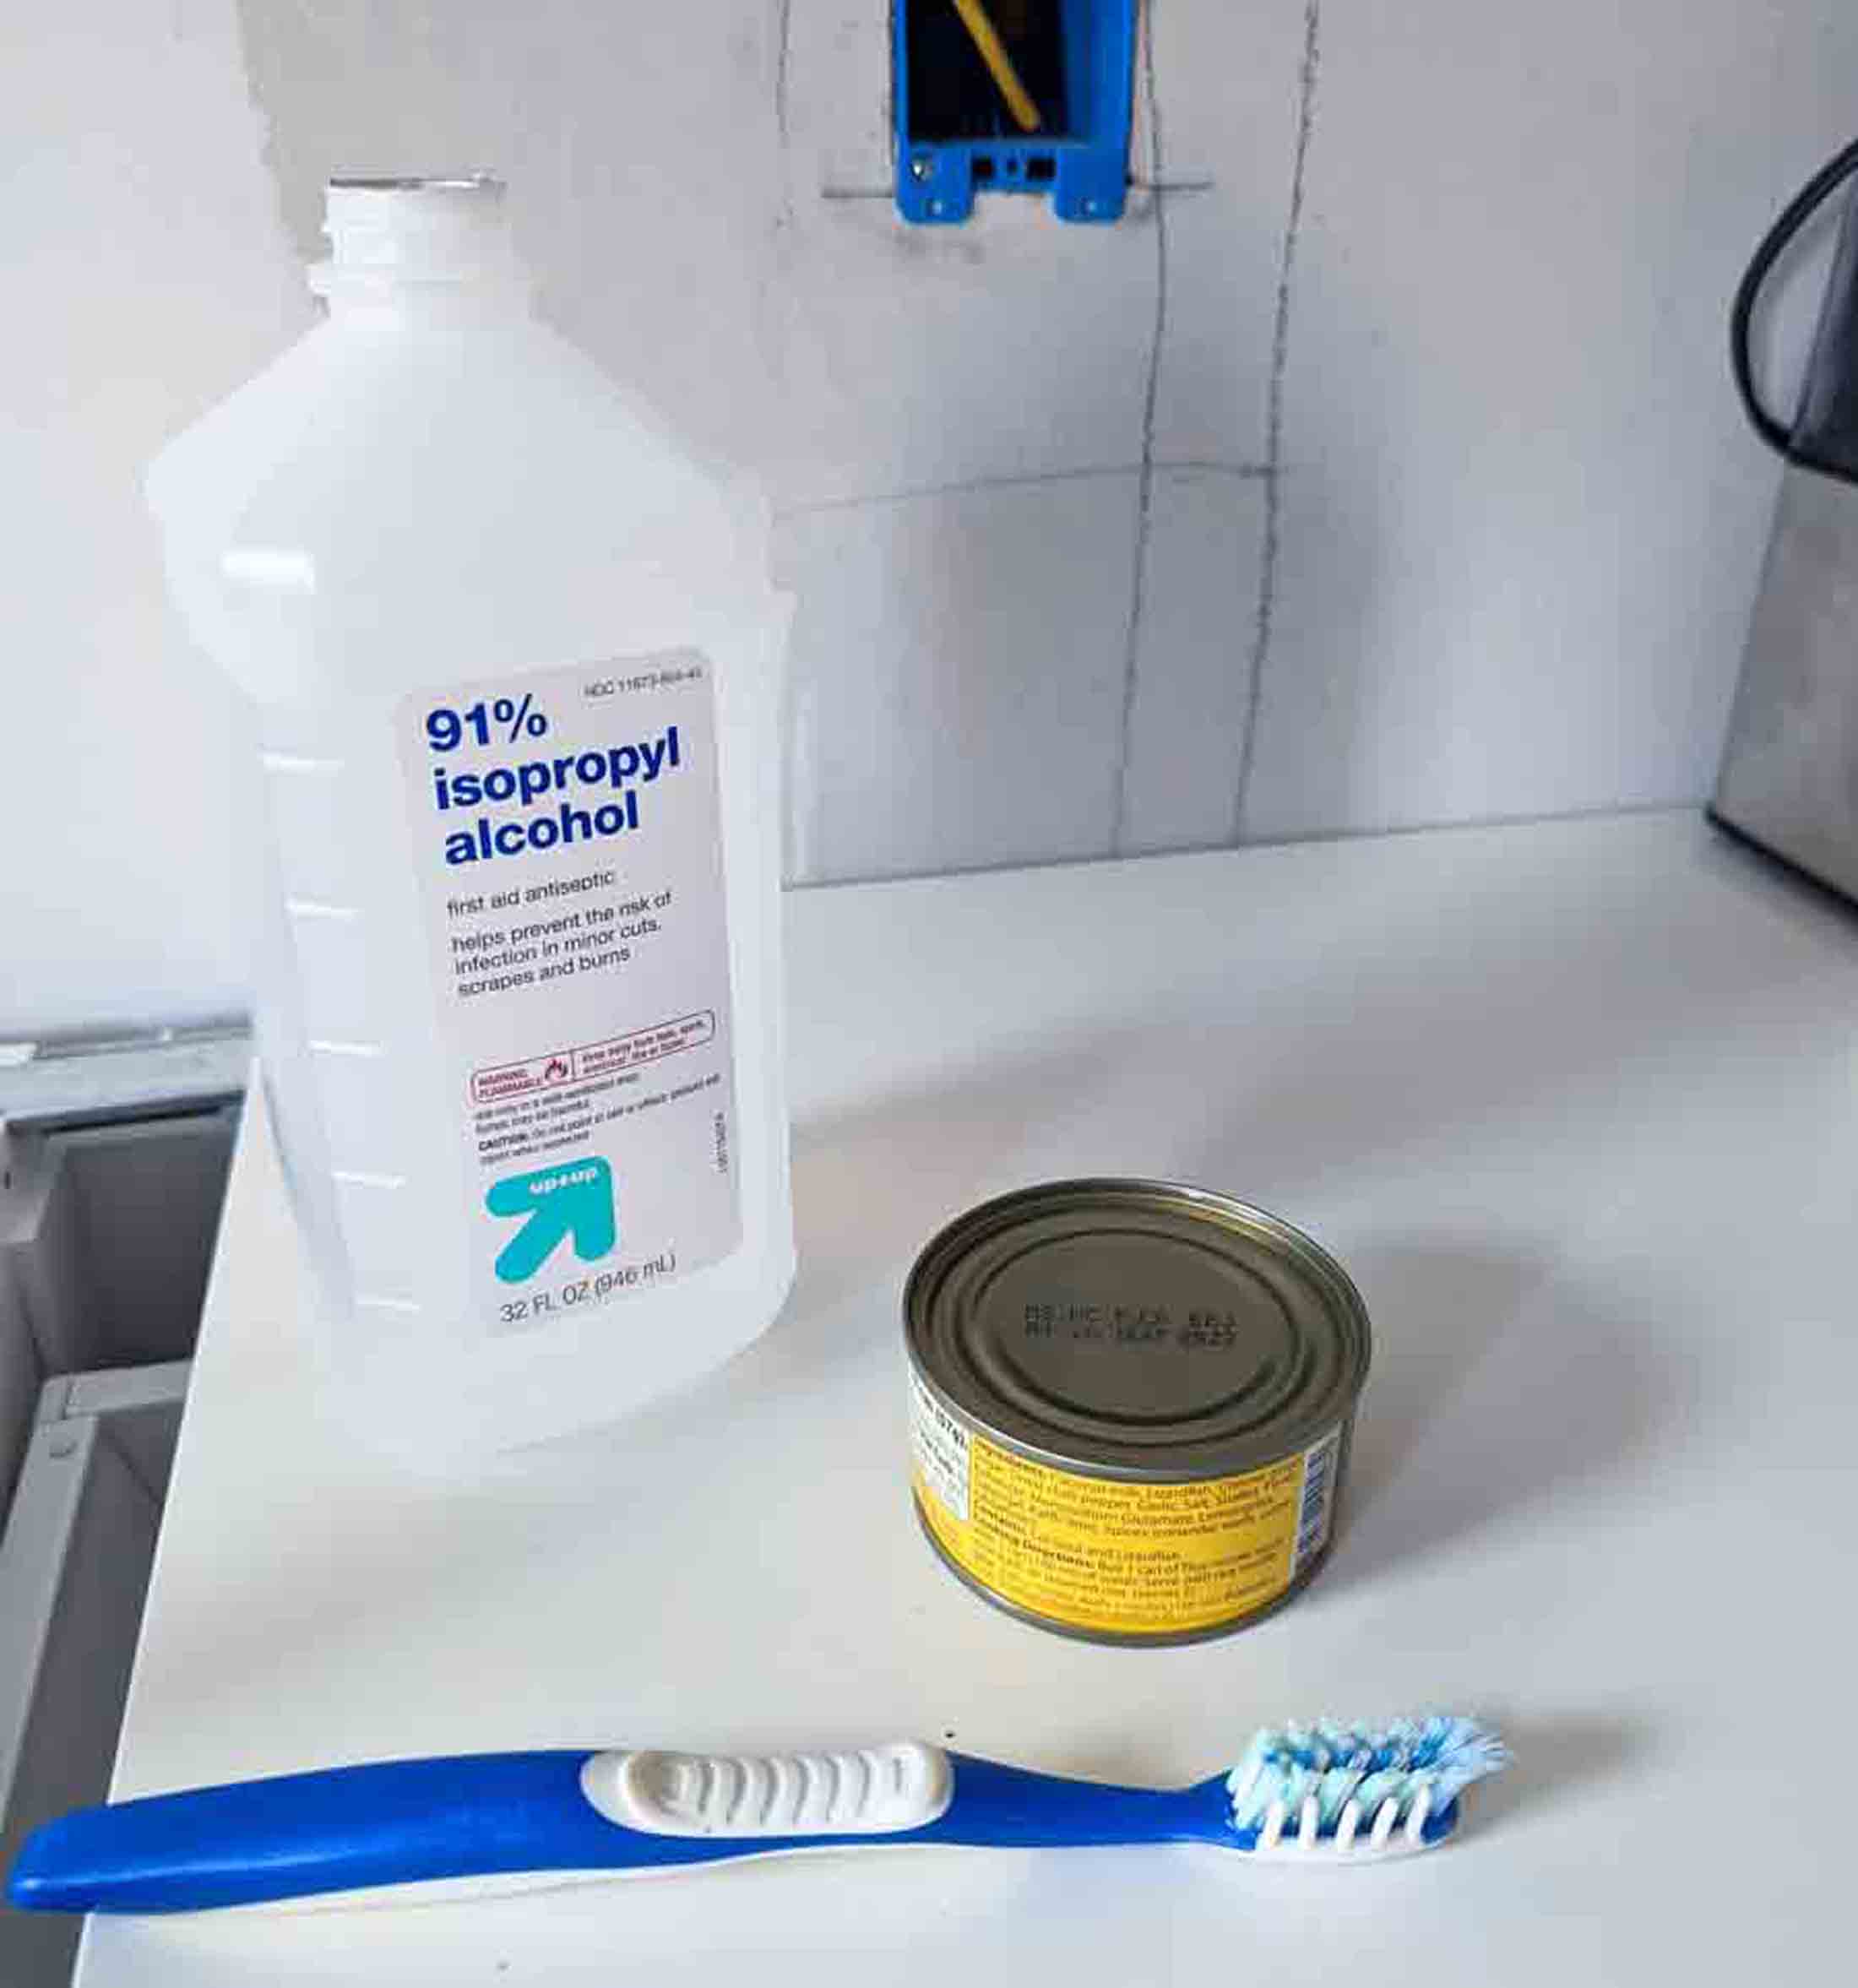 Items needed to clean dirty light switches and outlets: rubbing alcohol, toothbrush, shallow dish.